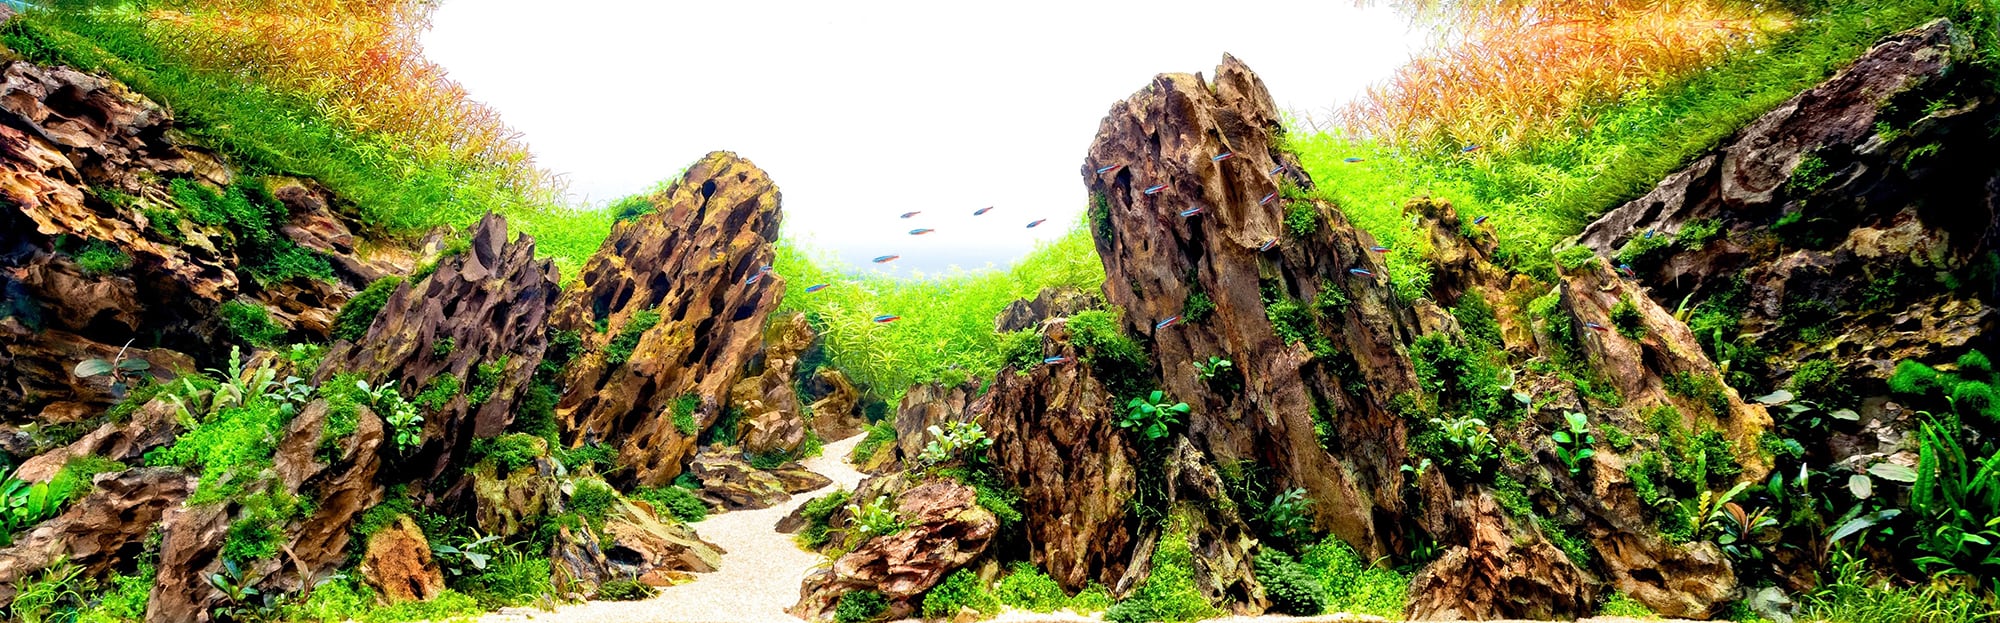 The Elements of Aquascaping: Rocks, Driftwood & Substrates - Aquascaping Love